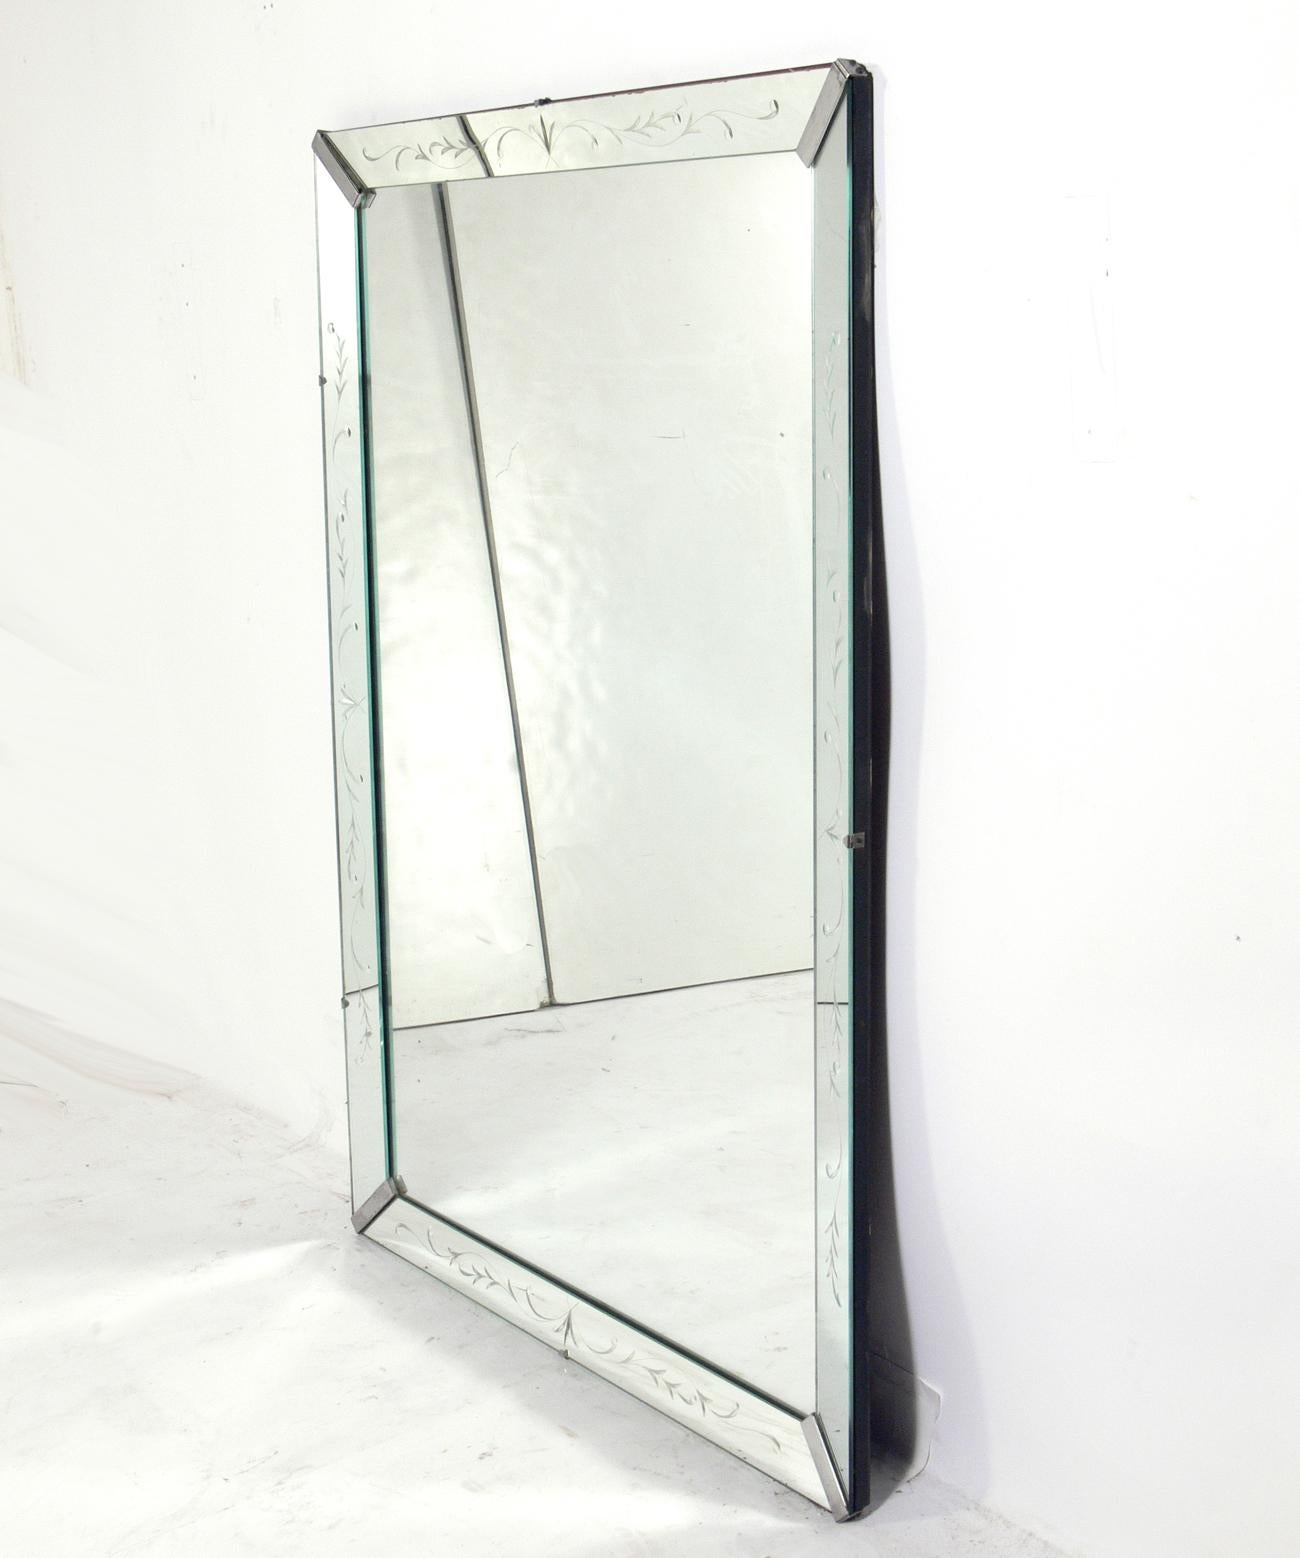 Clean lined mirror with nickel fittings, American, circa 1940s. It can be mounted vertically or horizontally.